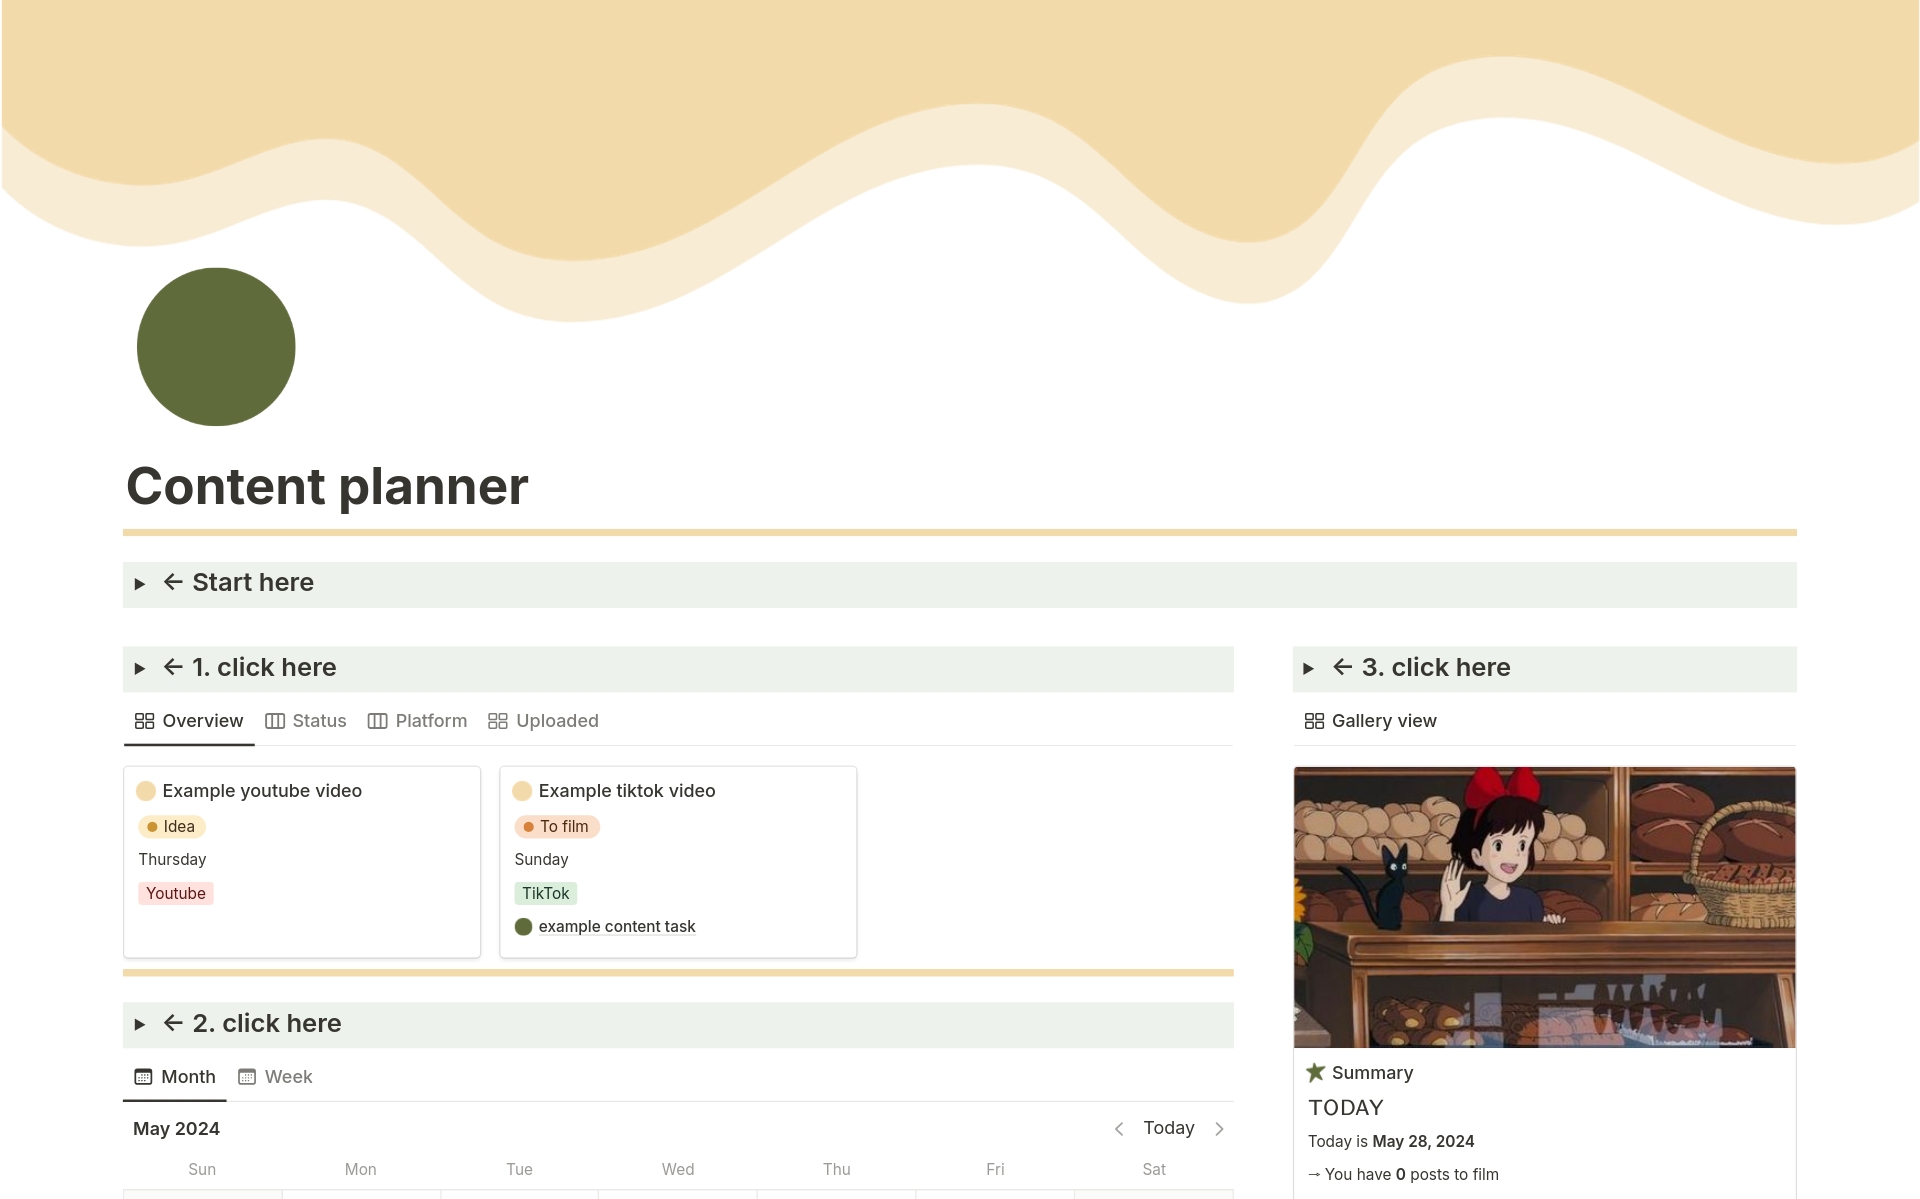 Our Notion Content Planner is the perfect planner for organizing every aspect of your content creation process. We've crafted detailed descriptions for each feature, ensuring a smooth start even if you're new to Notion